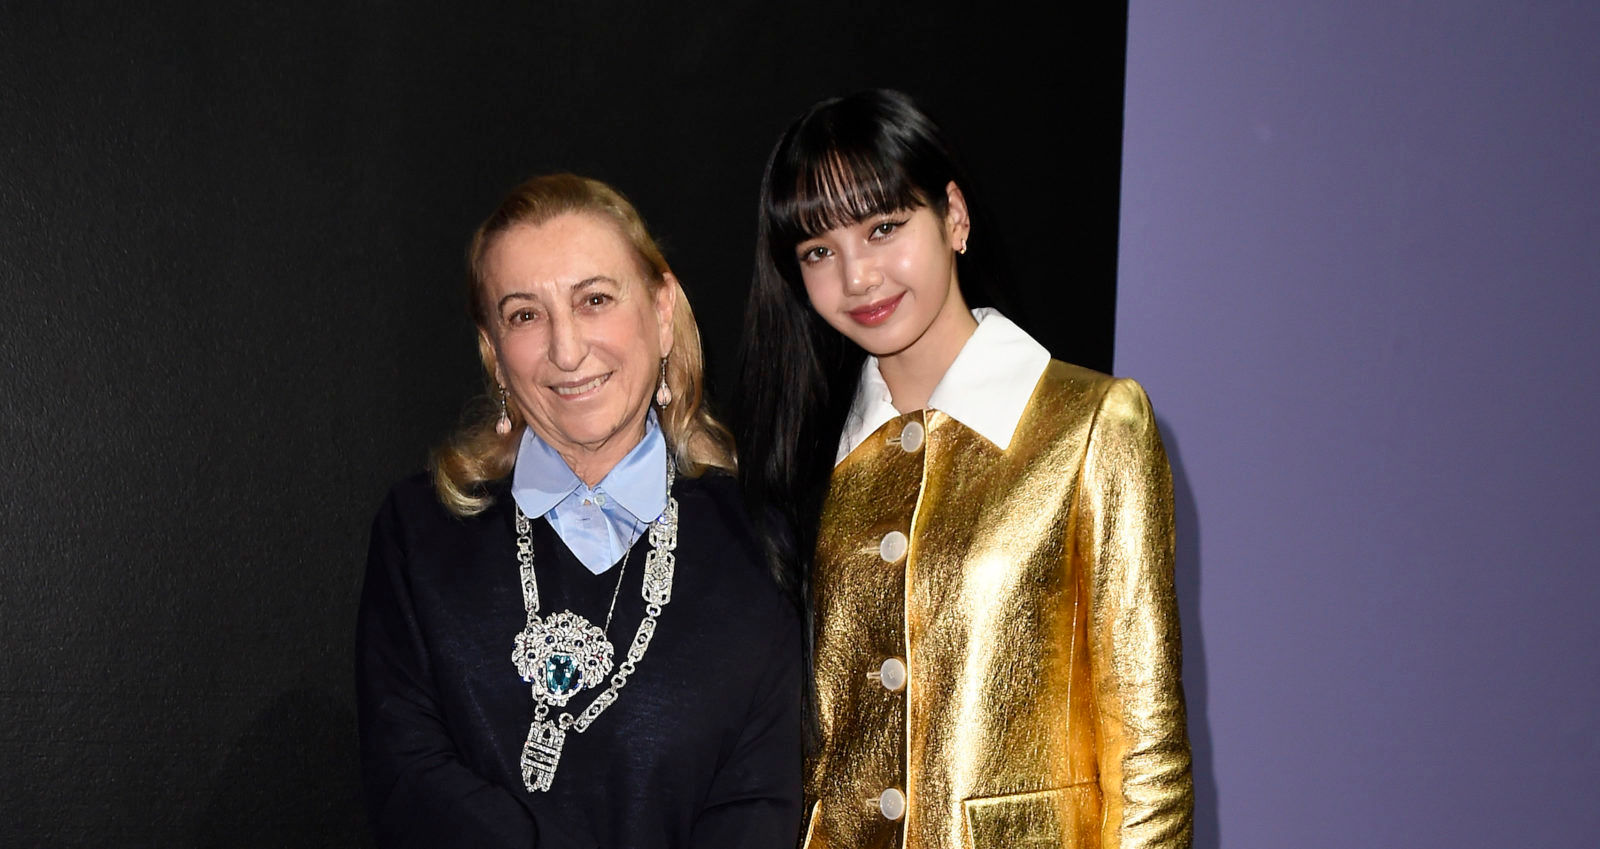 MFW highlights: Blackpink’s Lisa sat front row at Prada, Giorgio Armani spoke against trends and more